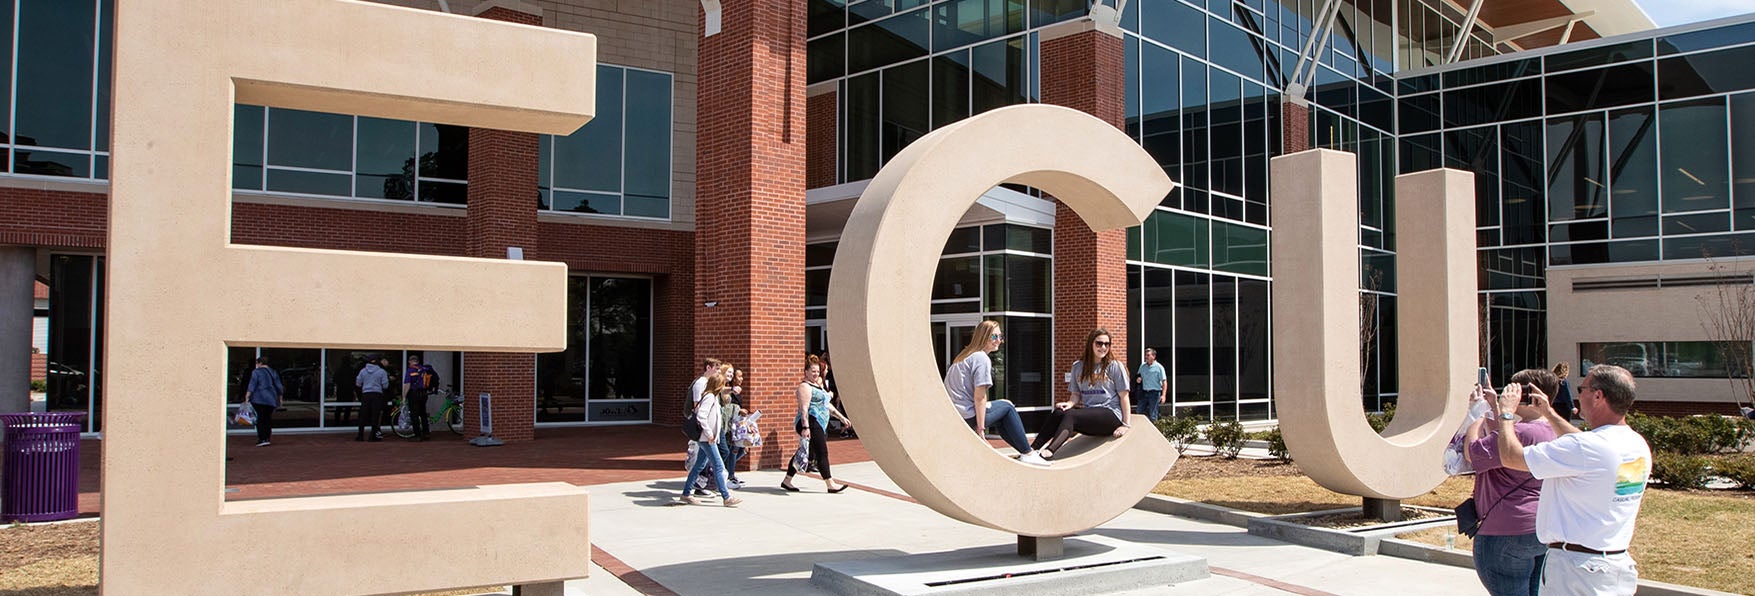 Family and friends take photos of incoming freshmen with the ECU letters at the Main Student Center during Admitted Student Day at ECU on Saturday. (Photo by Rhett Butler)